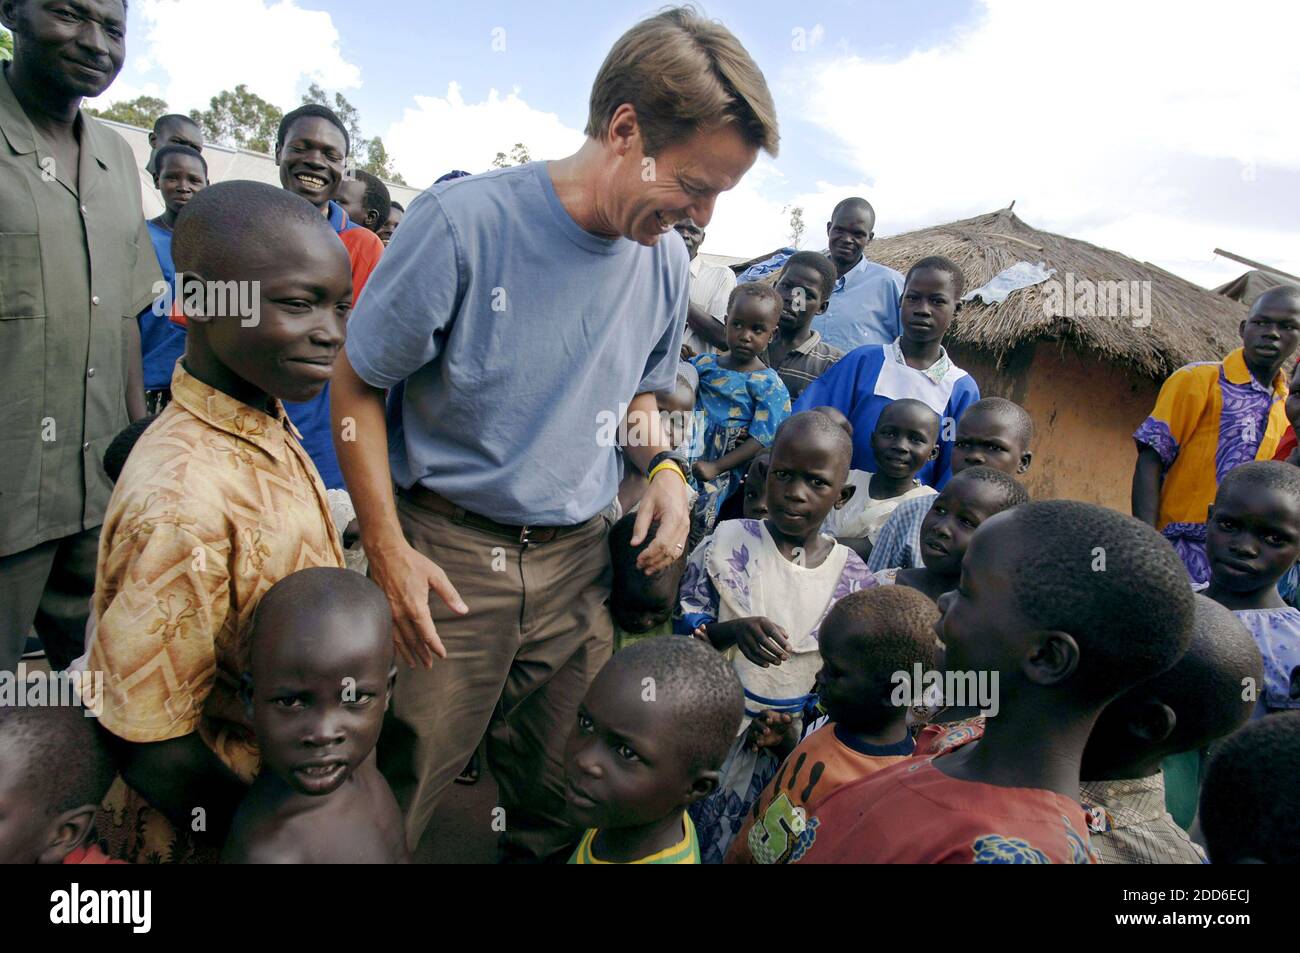 NO FILM, NO VIDEO, NO TV, NO DOCUMENTARY - Former Senator John Edwards tours Lira in Northern Uganda, on October 1, 2006. For the past 20 years the Lord's Resistance Army and the Ugandan government have waged a civil war in the region. The Lord's Resistance Army is known for targeting children has abducted approximately 40,000 children during the conflict. In addition, over 100,000 people have been killed and close to two million people have been displaced. Photo by Vanessa Vick/MCT/ABACAPRESS.COM Stock Photo